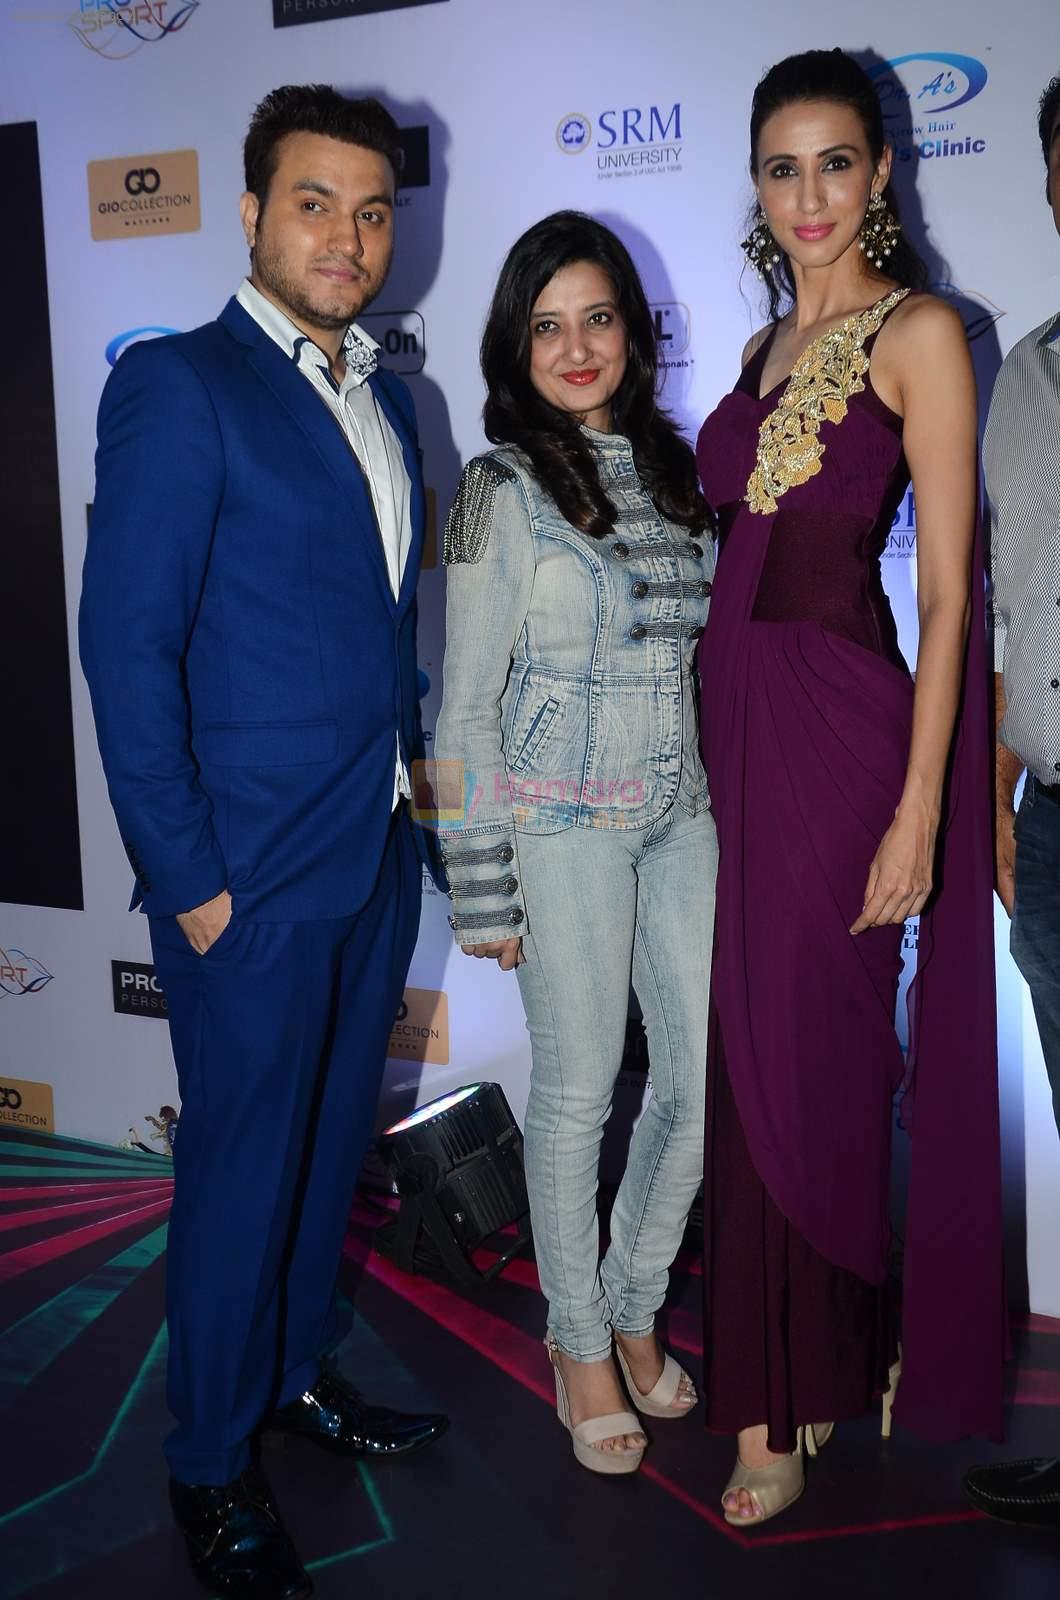 Alecia Raut at Mr India party in Royalty on 23rd July 2015